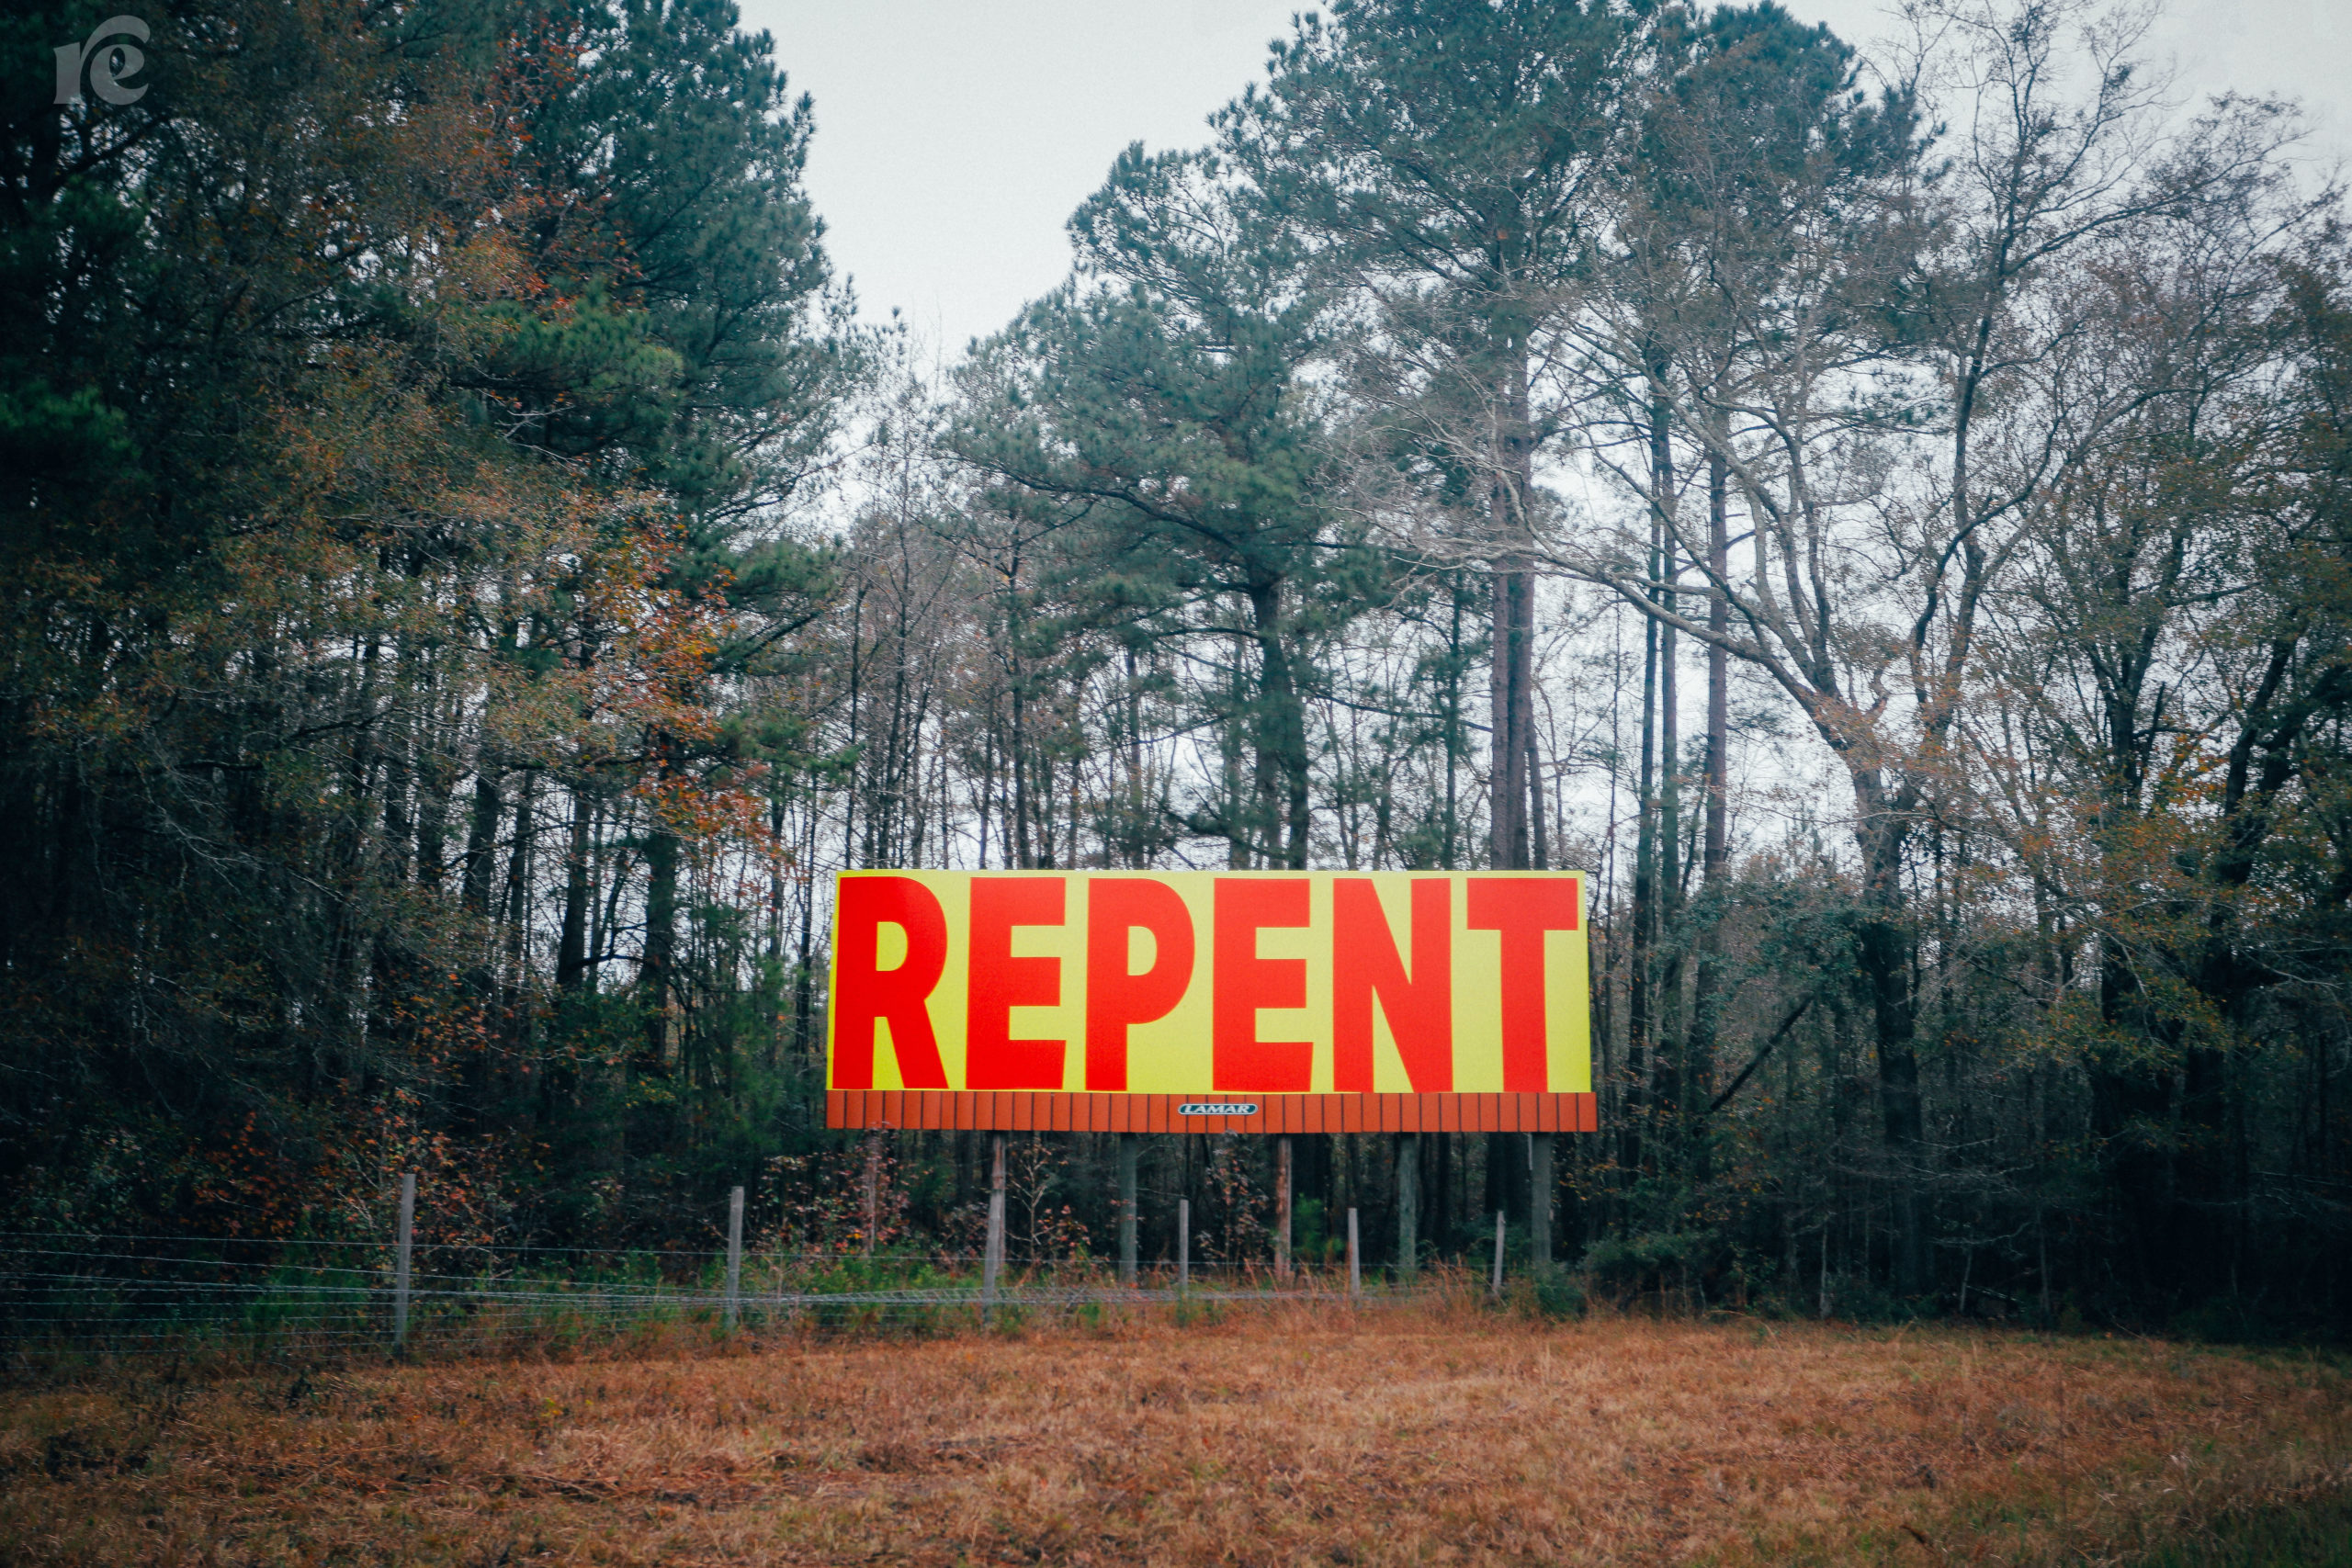 Photo of billboard, background is yellow and Repent is in all caps in red